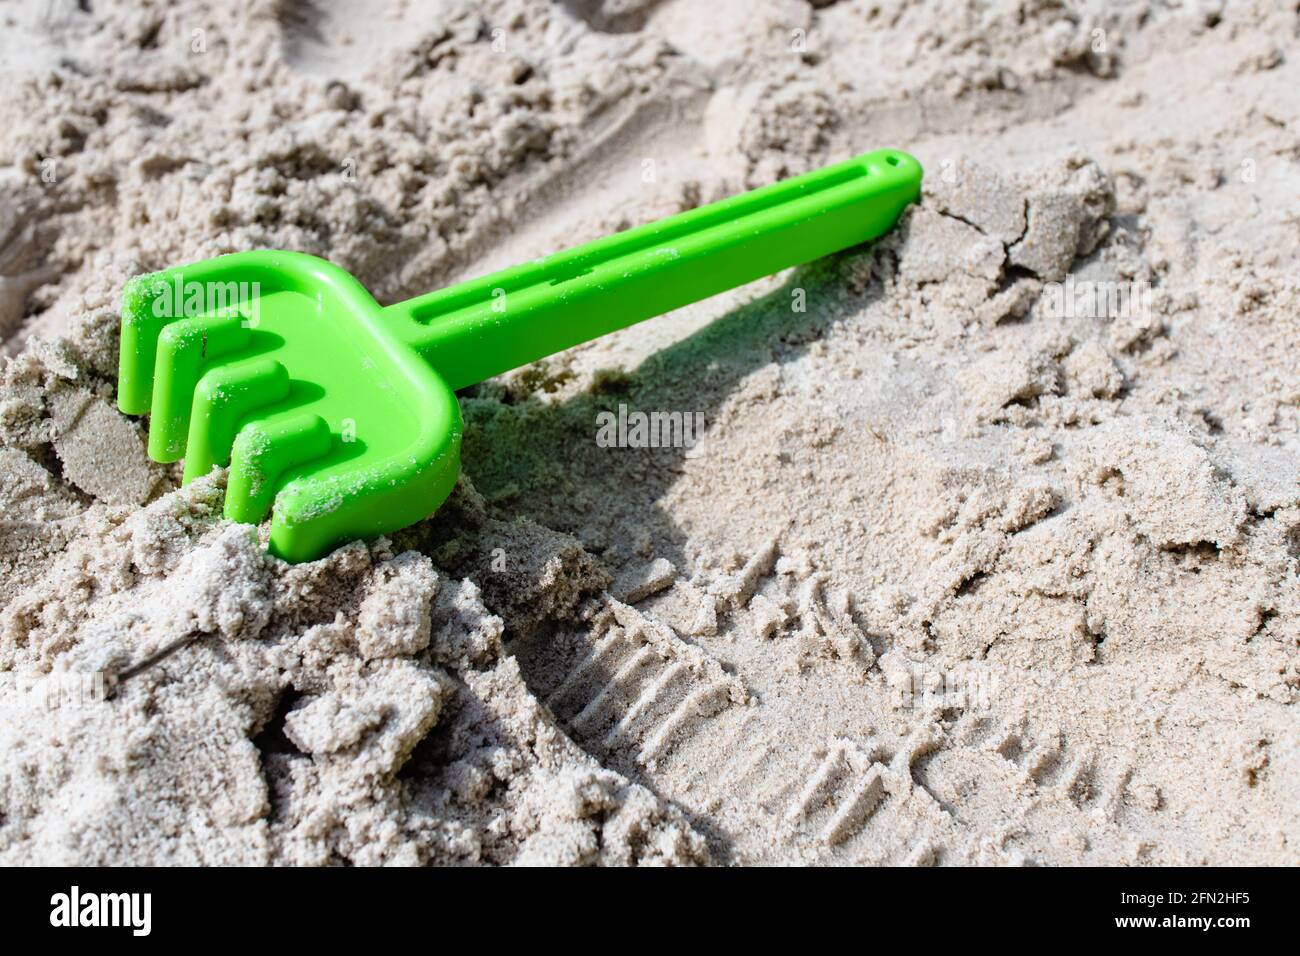 Toy rake for playing with sand on the beach on the sand Stock Photo - Alamy